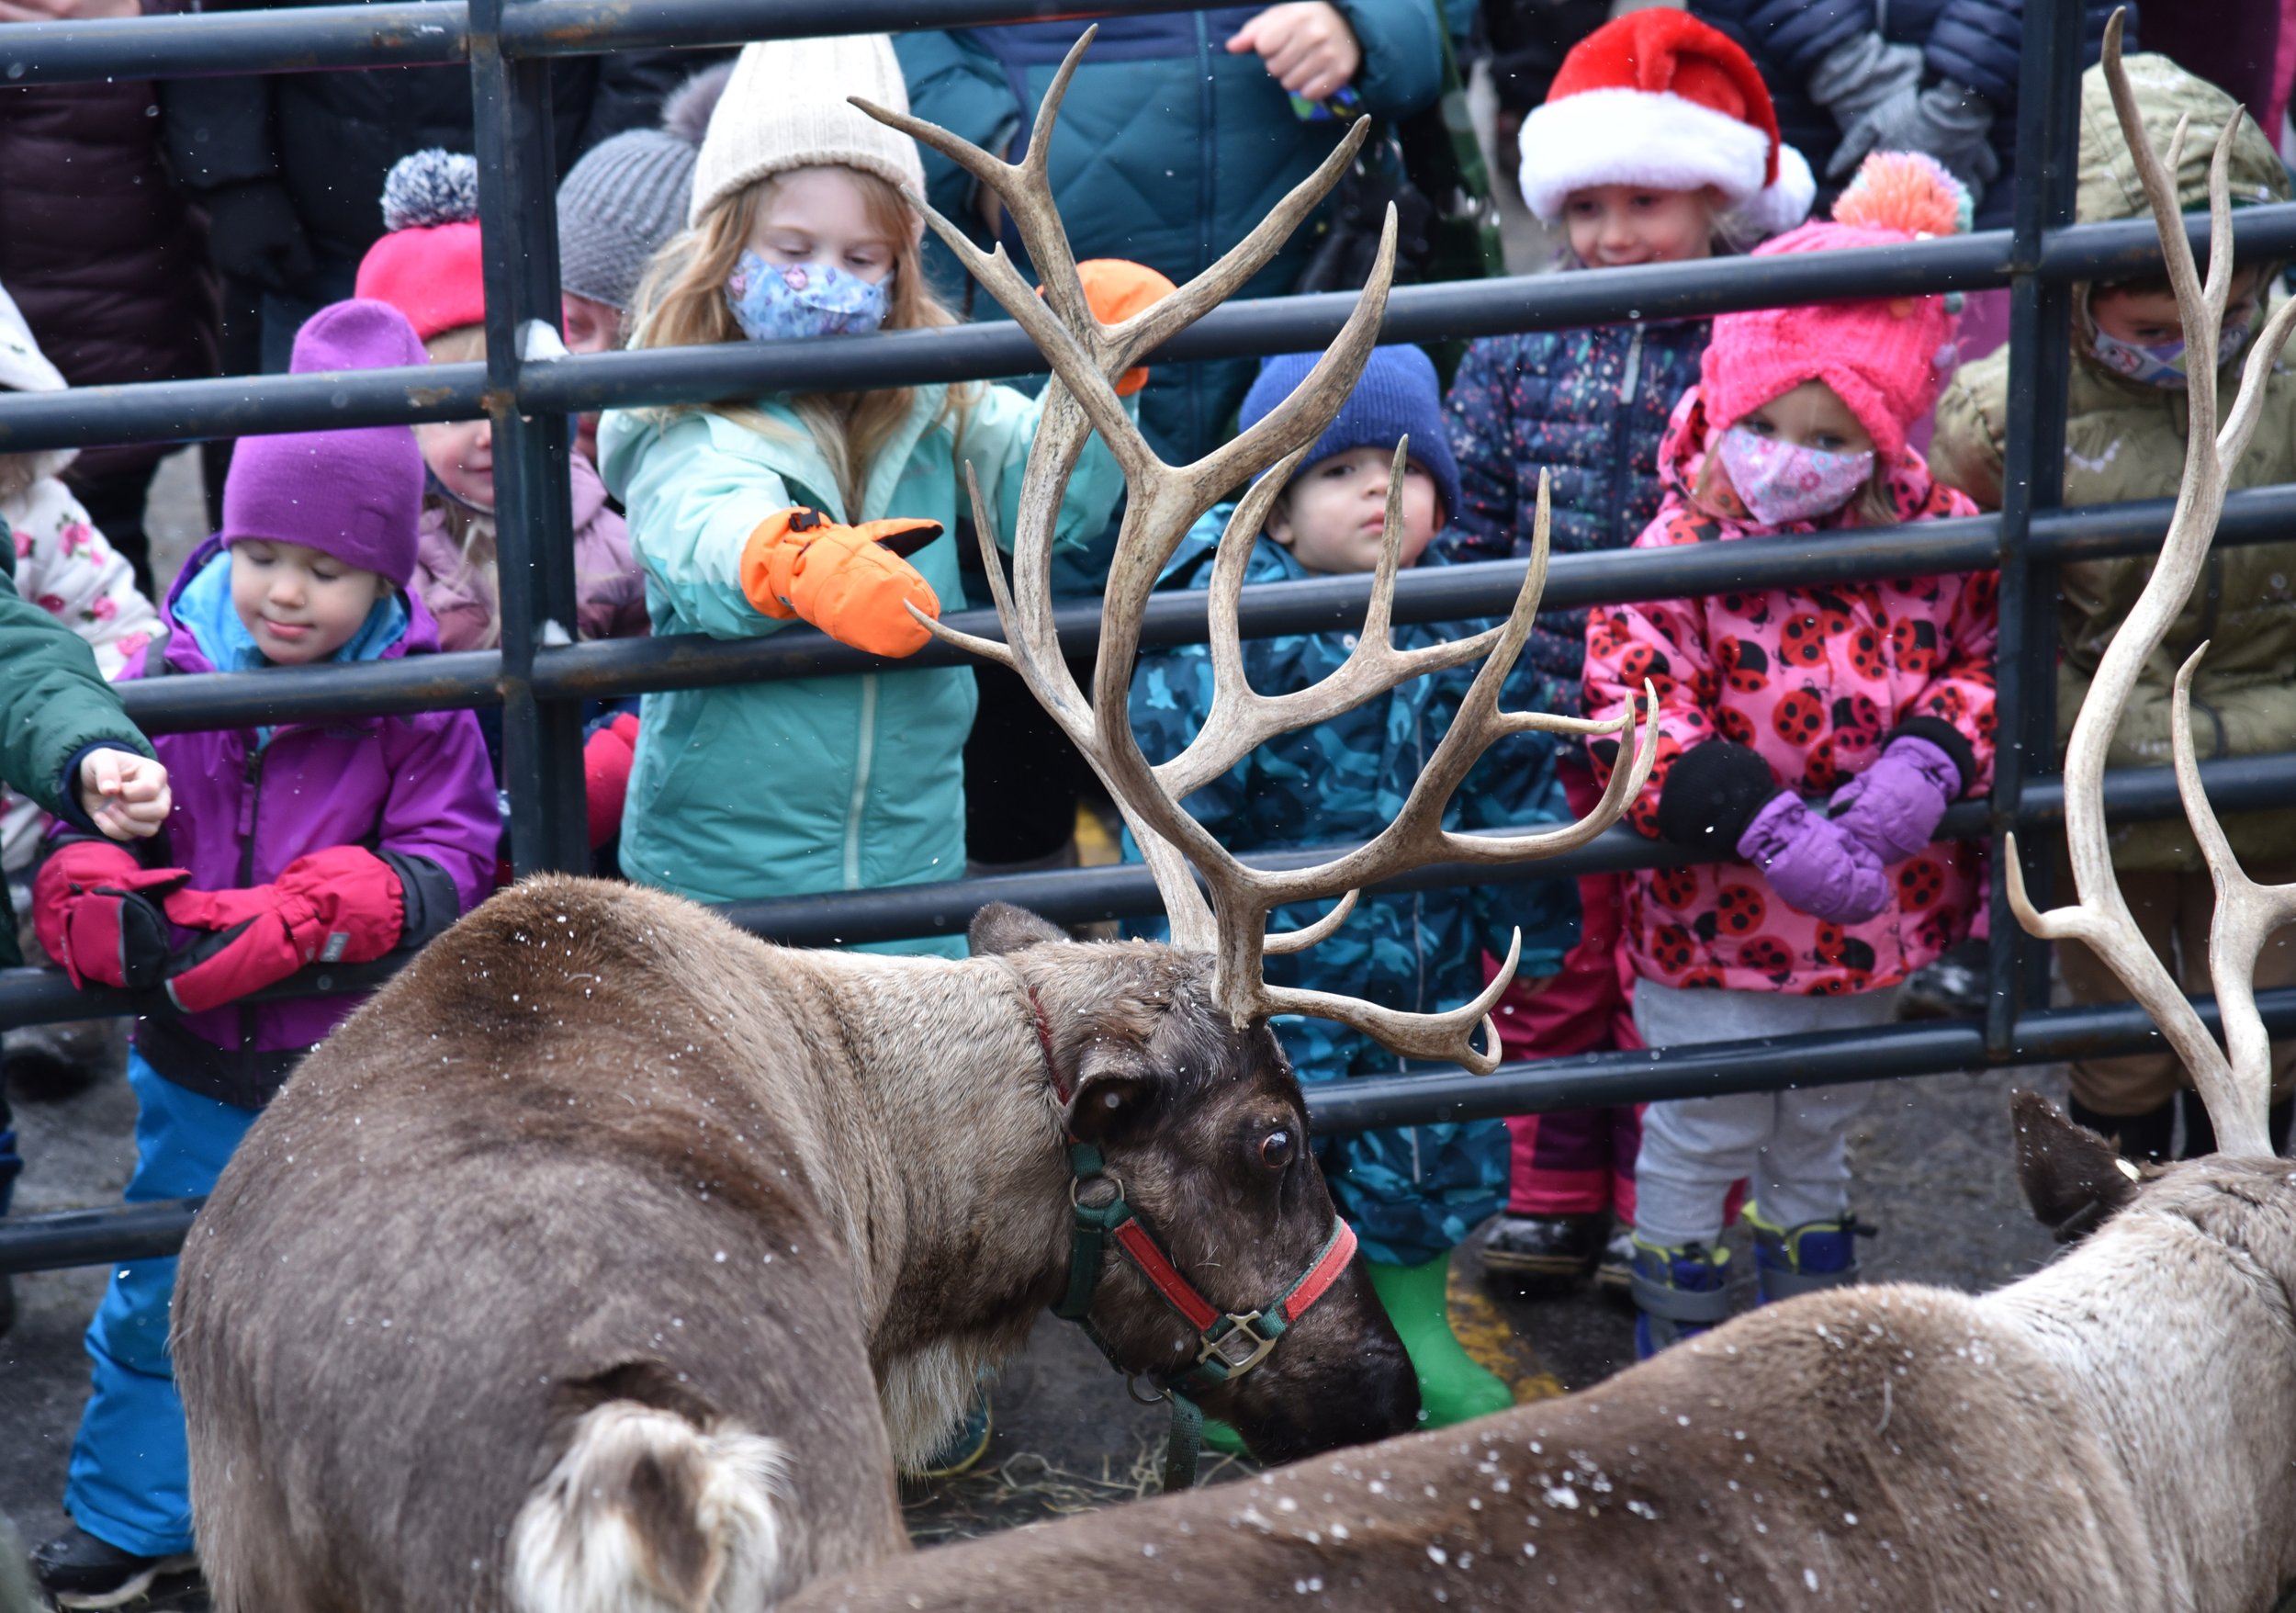  It’s not every day you get to meat a reindeer in real life. Photo by Gordon Miller 